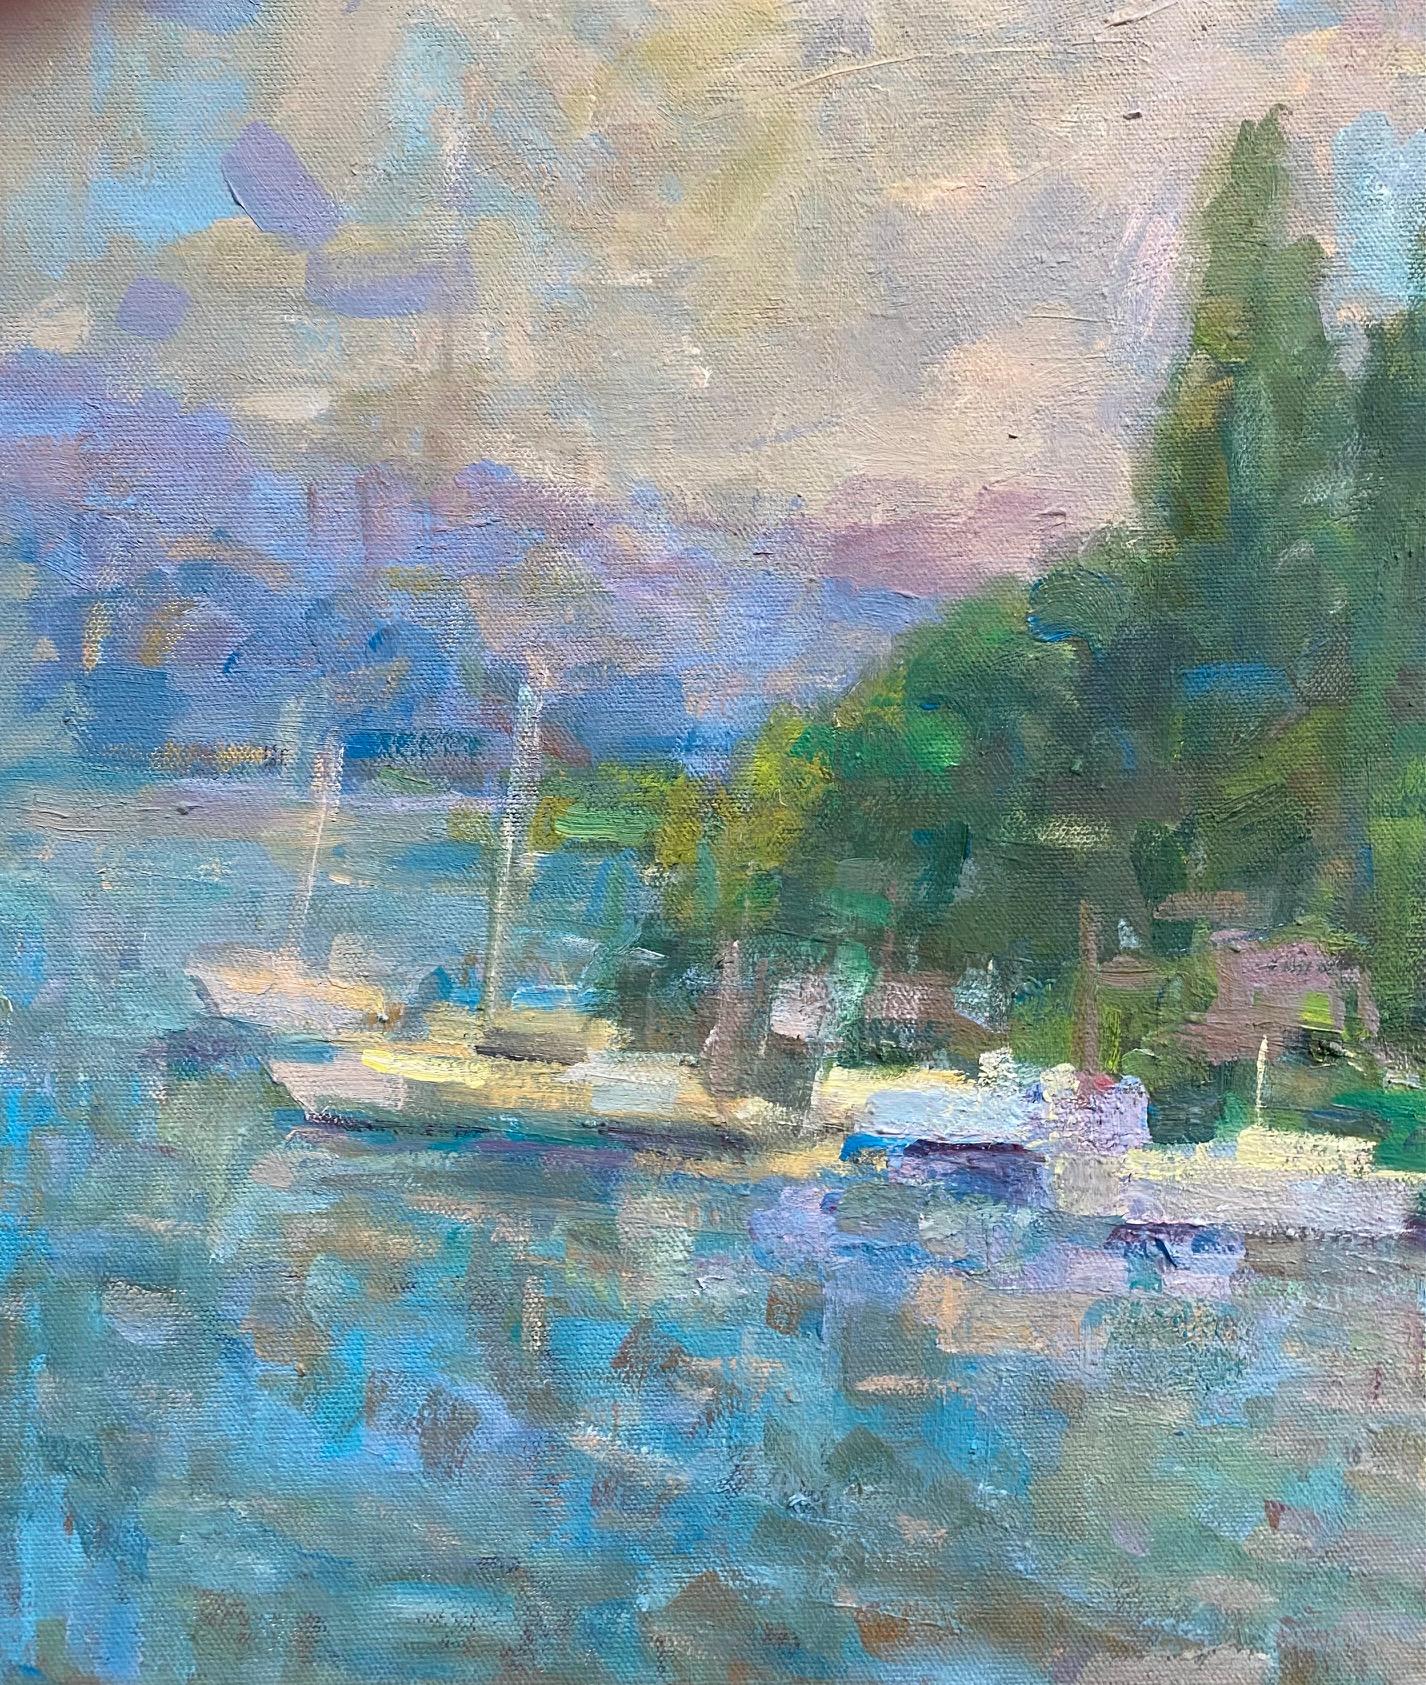 Set in the luxurious lake region of northern Italy, Lake Como is endlessly popular for it's private hideaways, exclusive resorts and jet setting crowds.  DeCeglie has used both classic impressionist impasto paint application and bold brush strokes